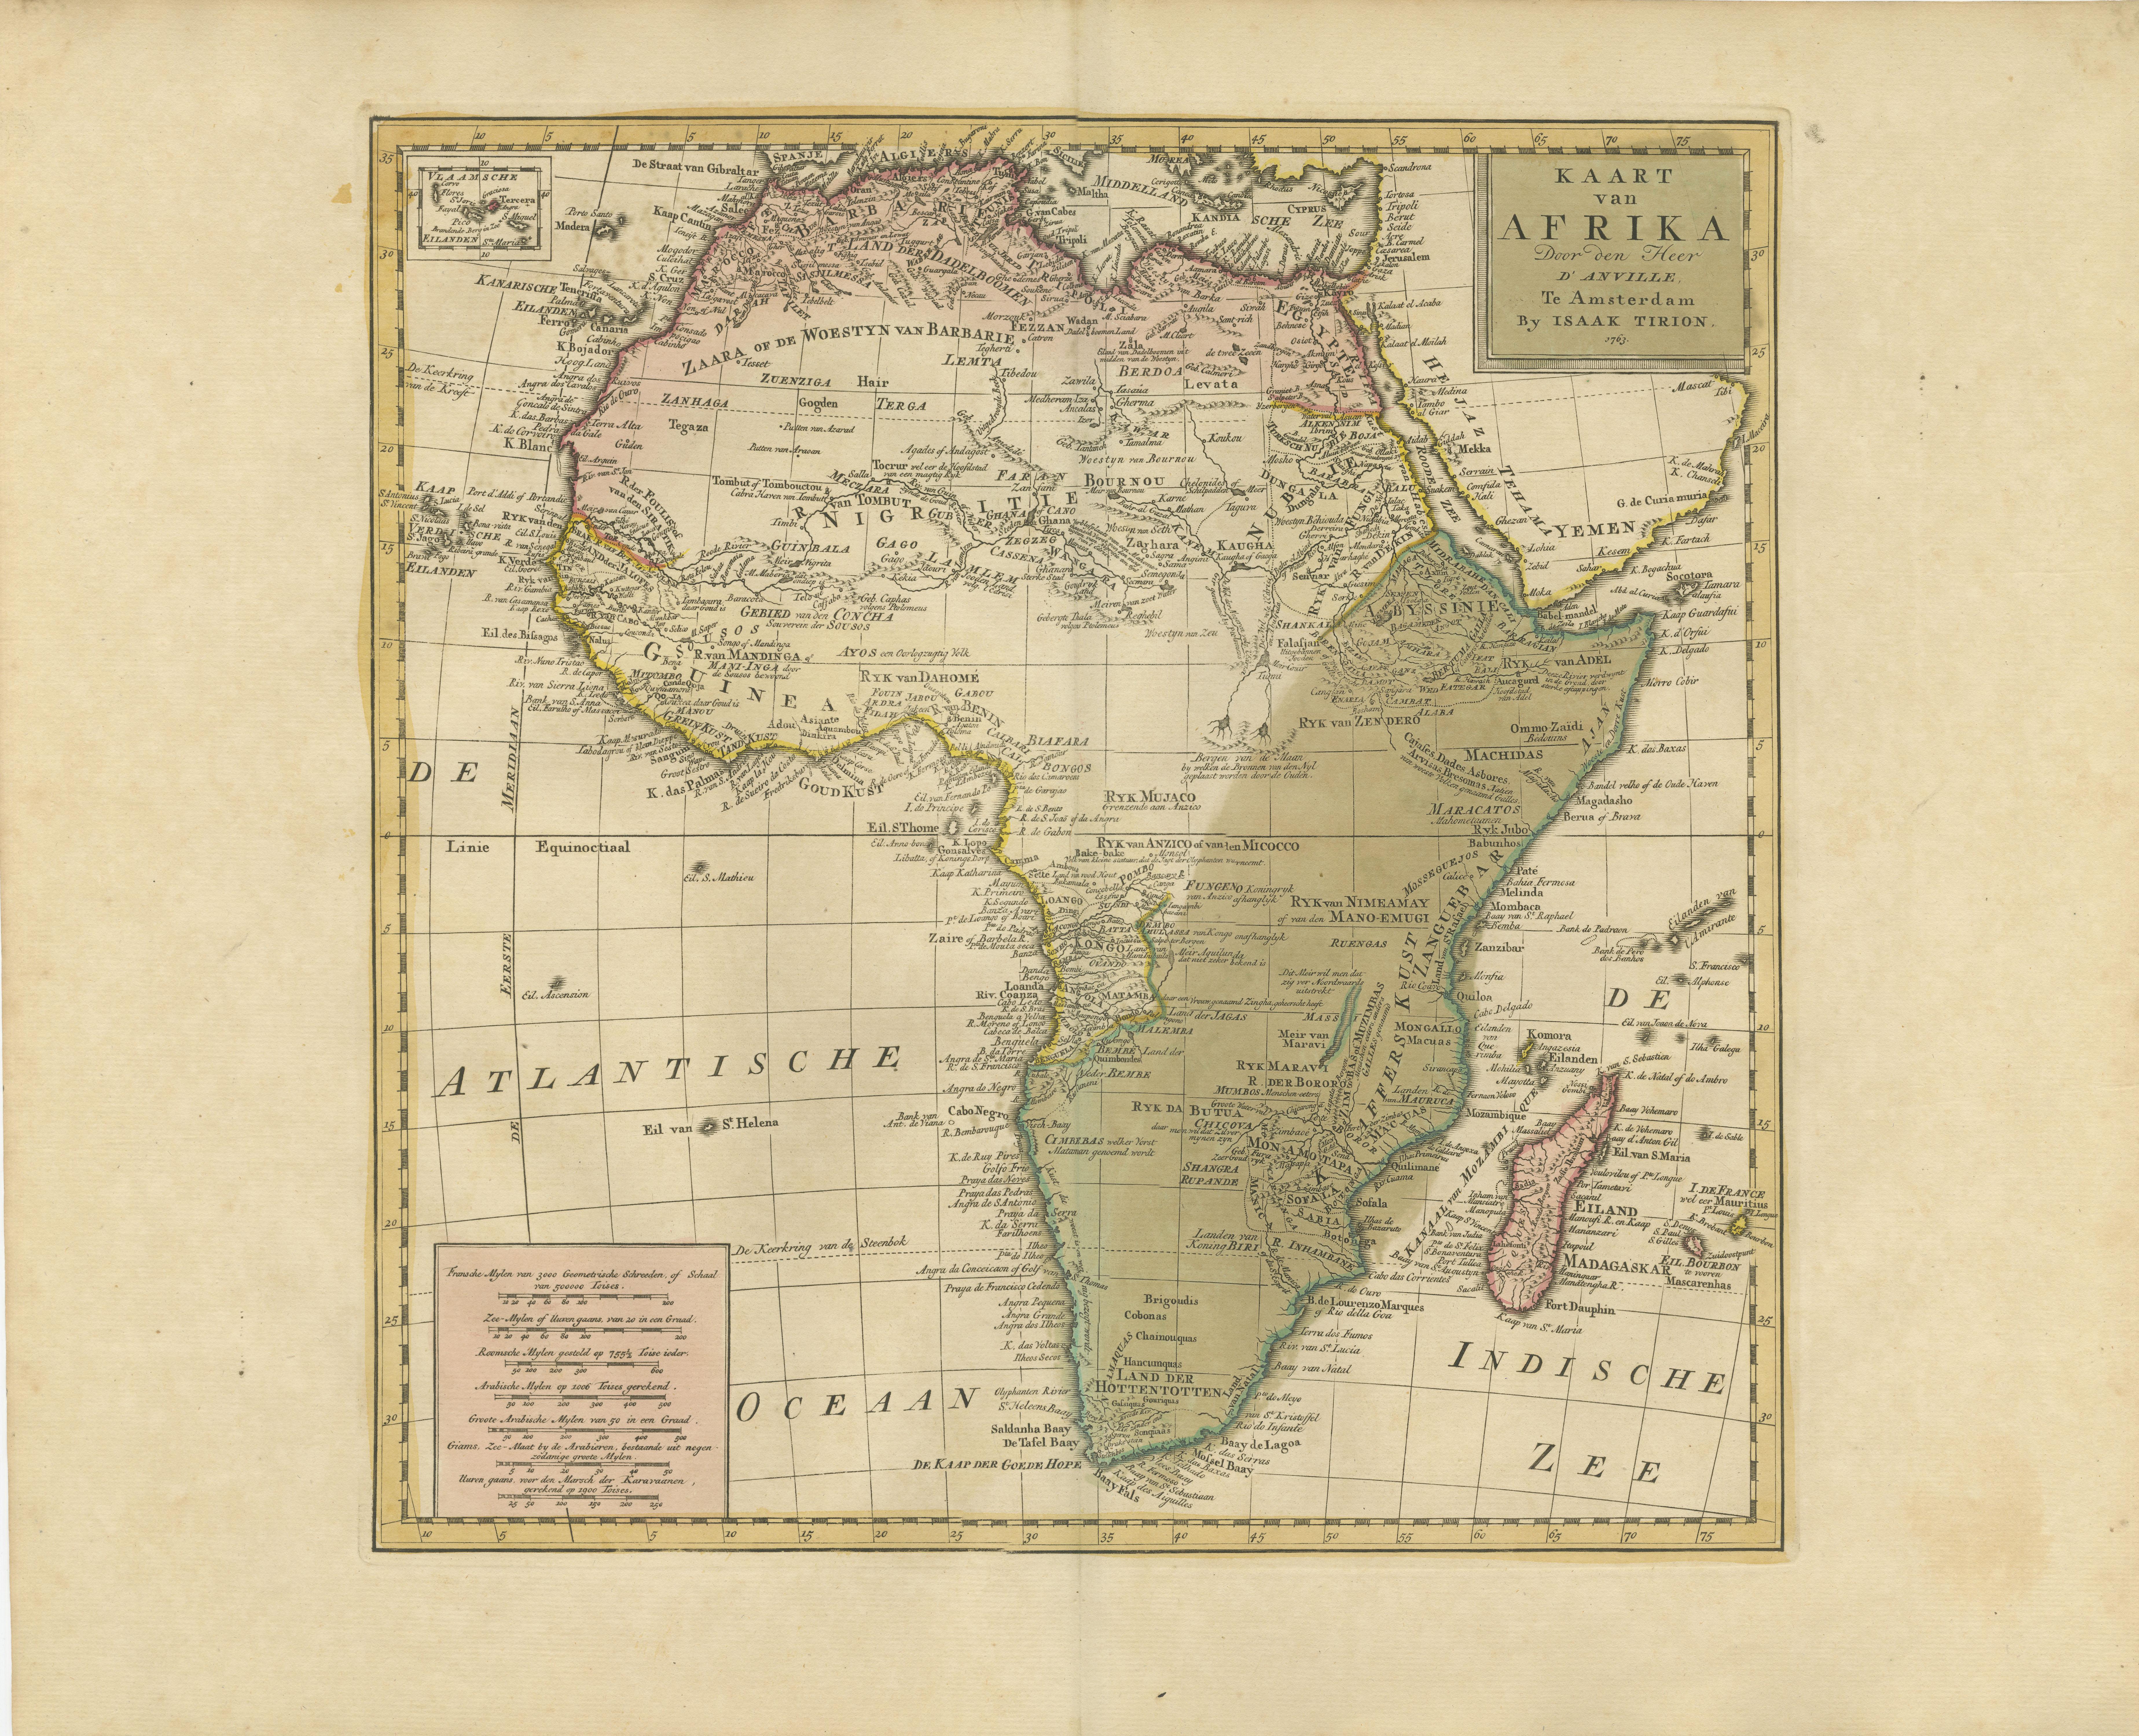 Antique map titled 'Kaart van Afrika door den Heer d'Anville'. Detailed original old map of Africa, with very small inset map titled 'Vlaamsche Eilanden', which shows the Azores. Published by I. Tirion, circa 1760. 

Tirion was born in Utrecht in